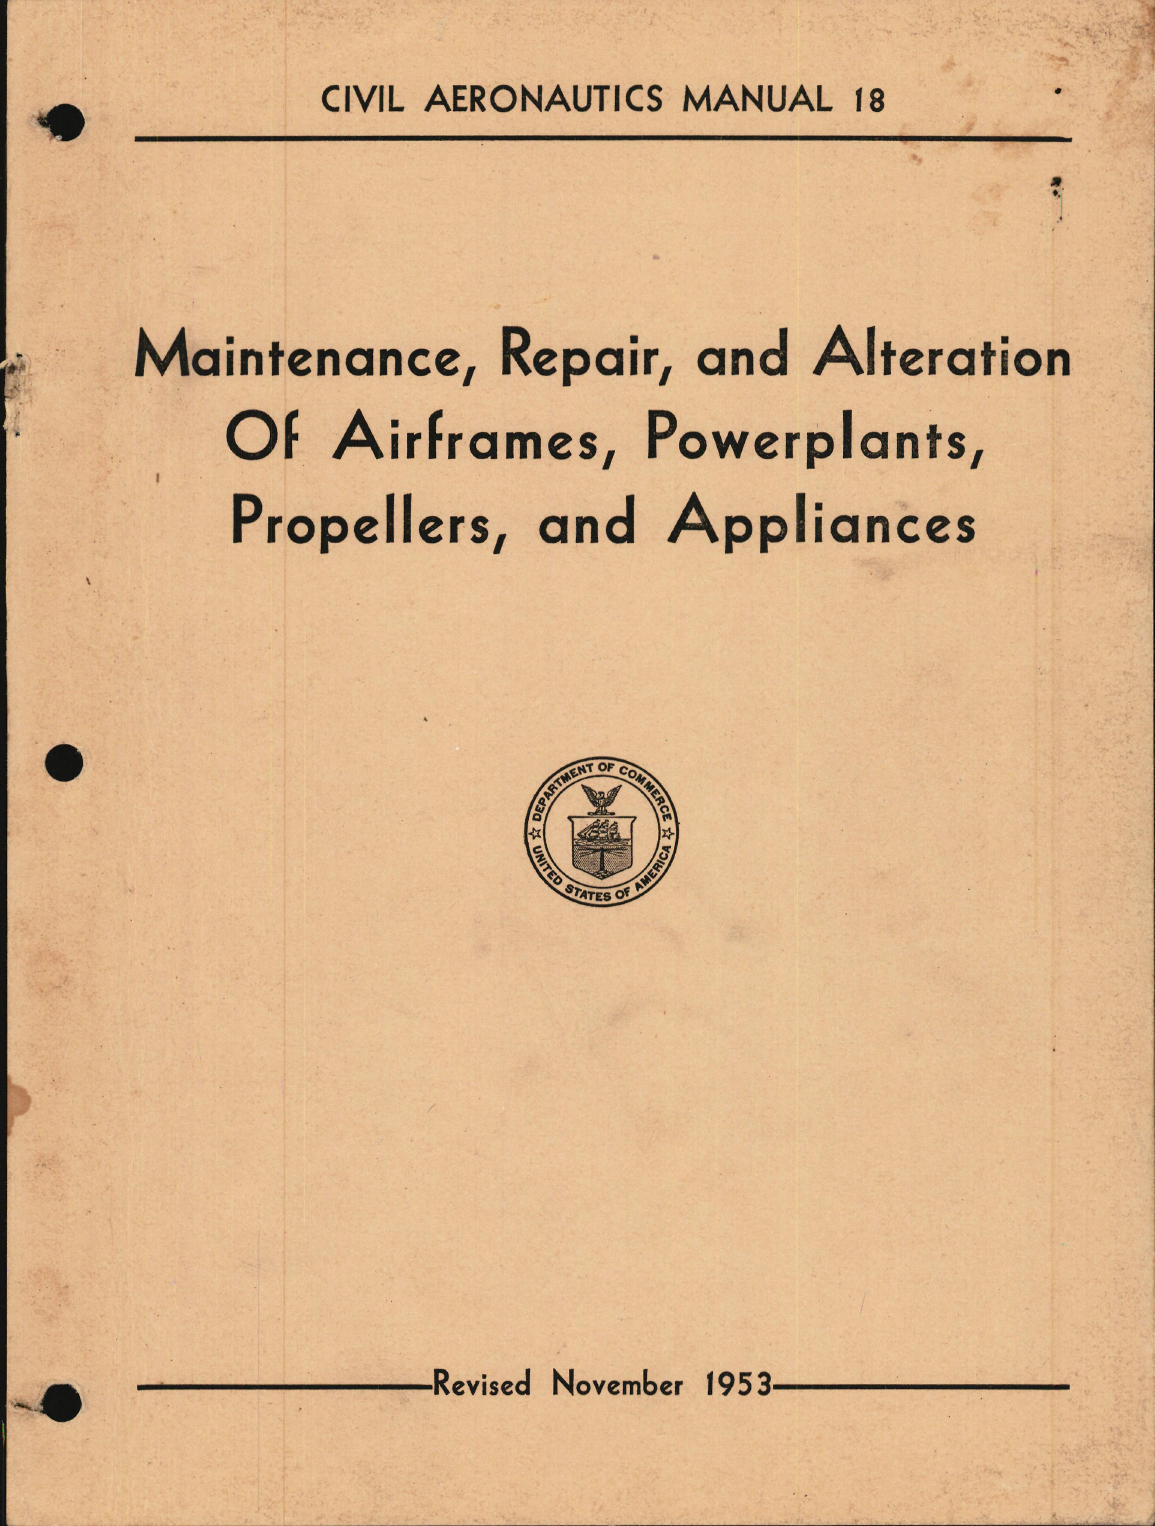 Sample page 1 from AirCorps Library document: Maintenance, Repair, and Alteration of Airframes, Powerplants, Propellers, and Appliances